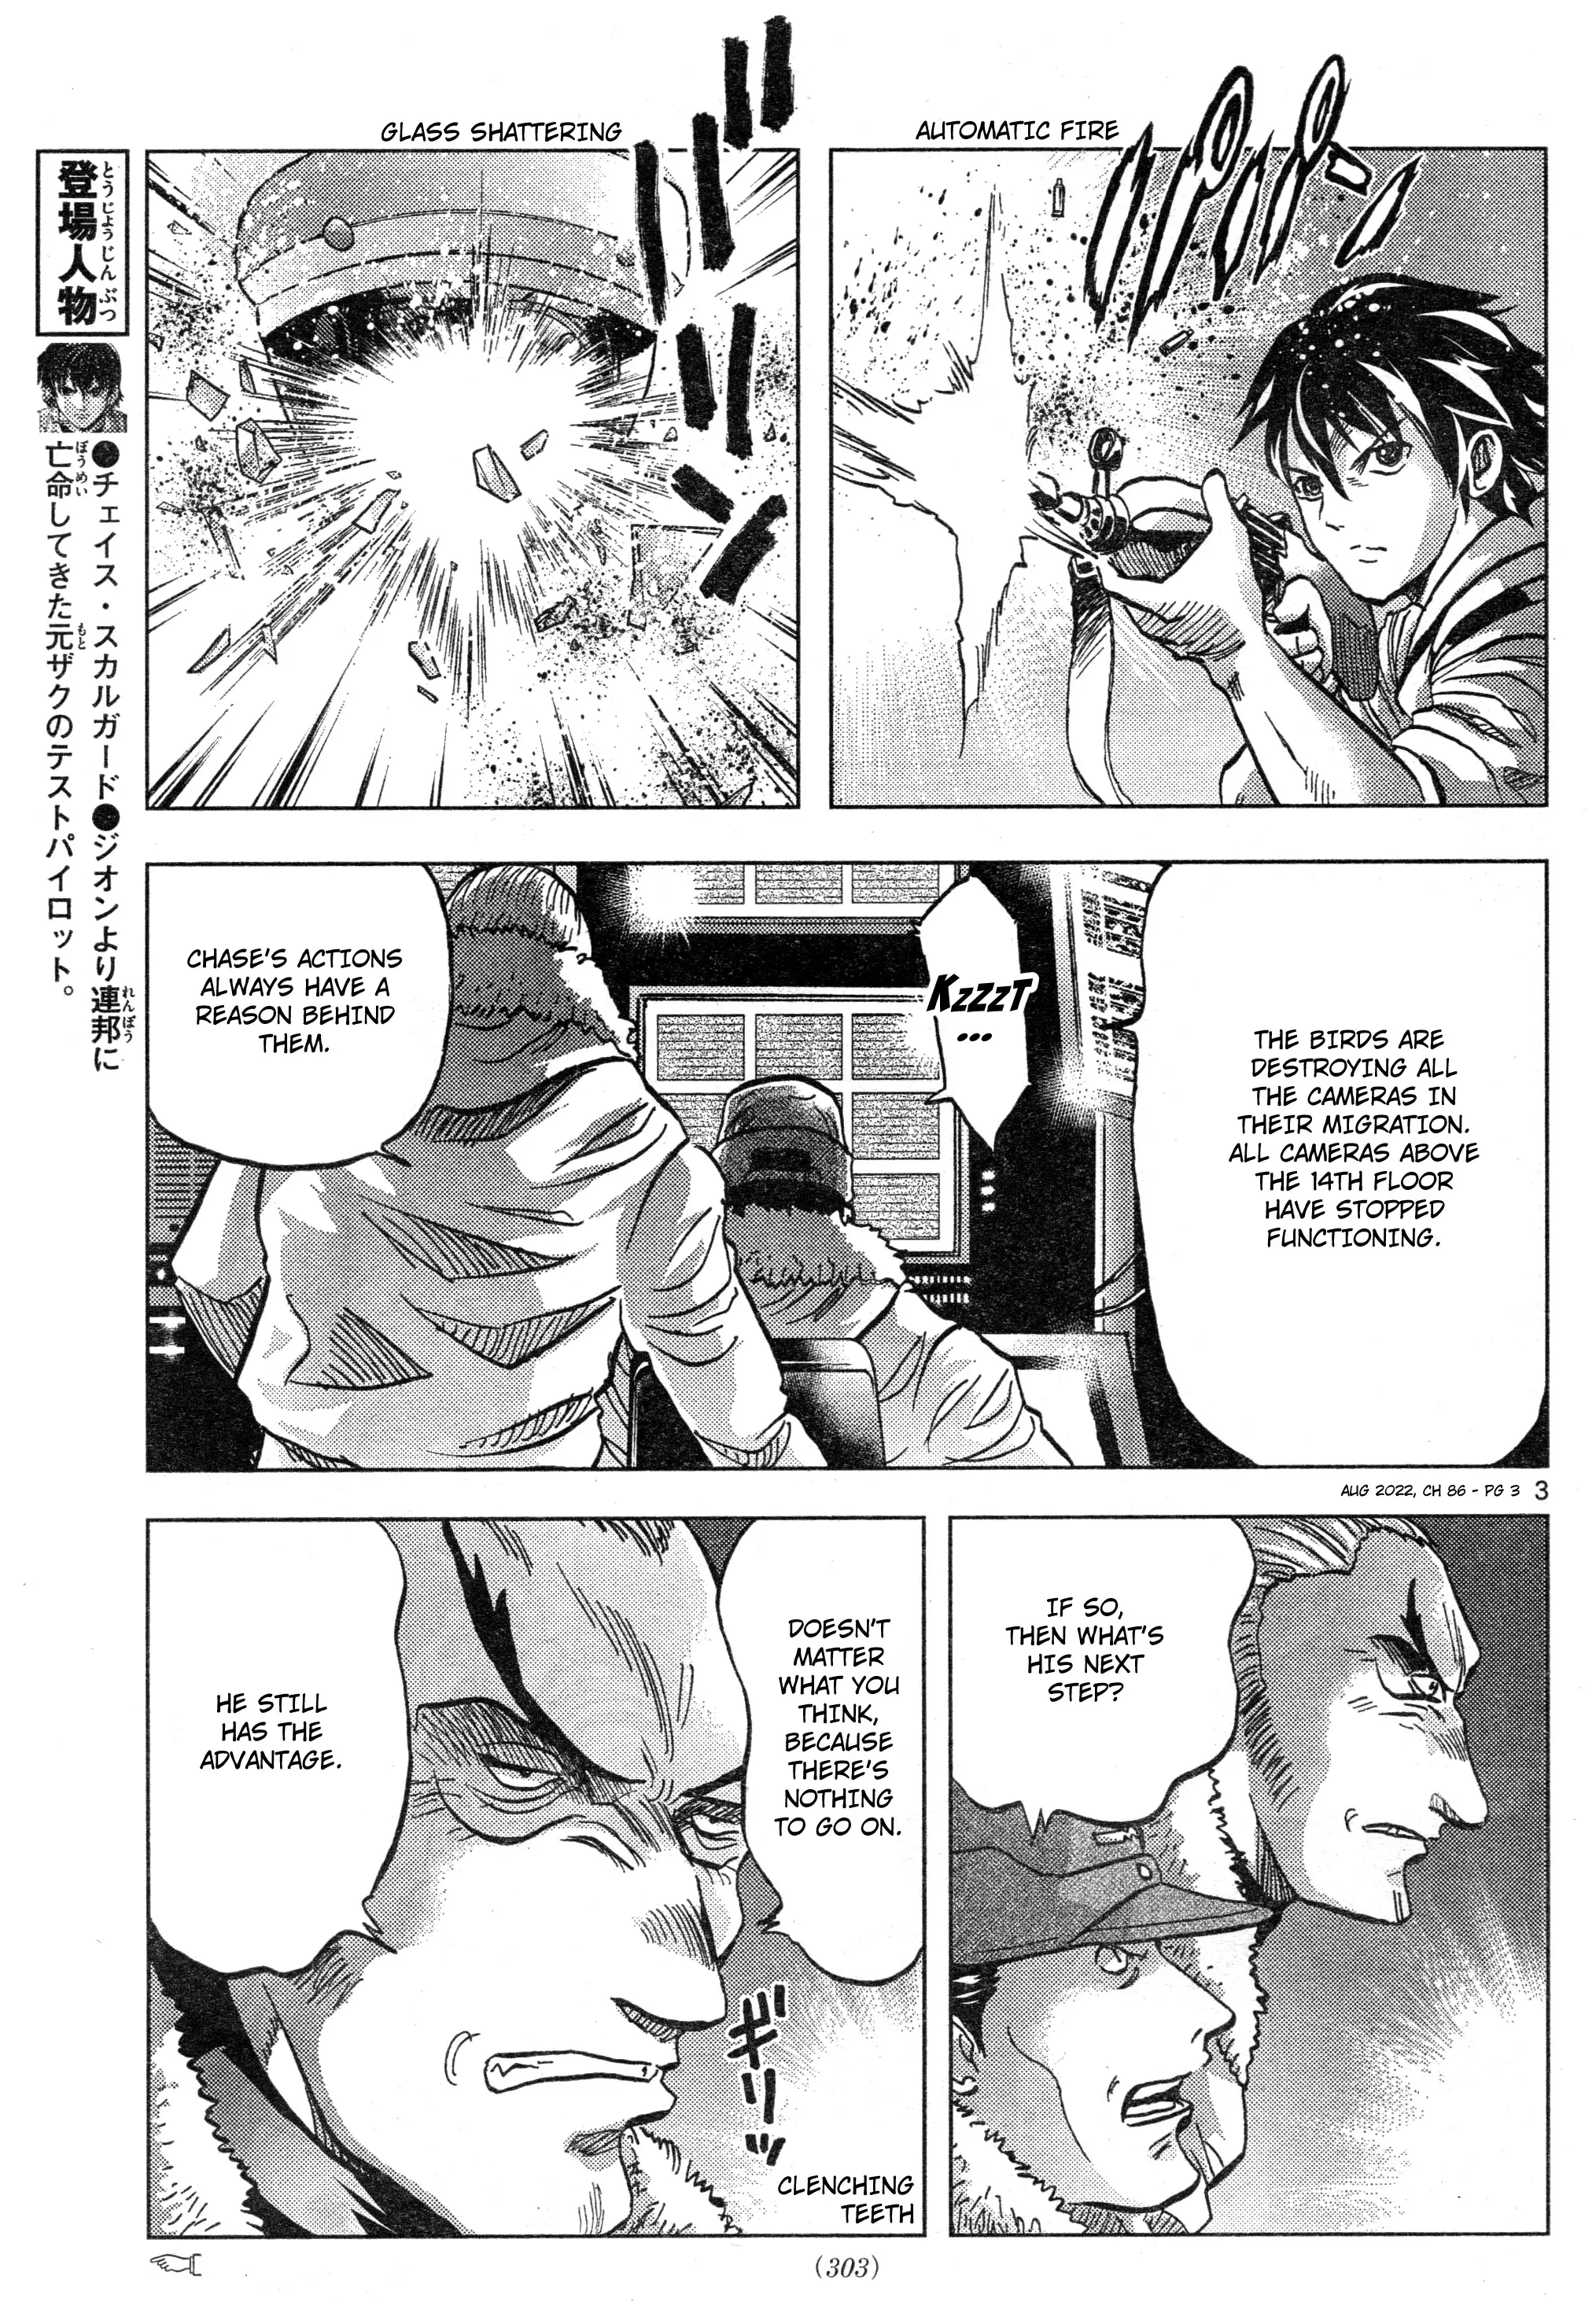 Mobile Suit Gundam Aggressor - 86 page 3-44c6abed